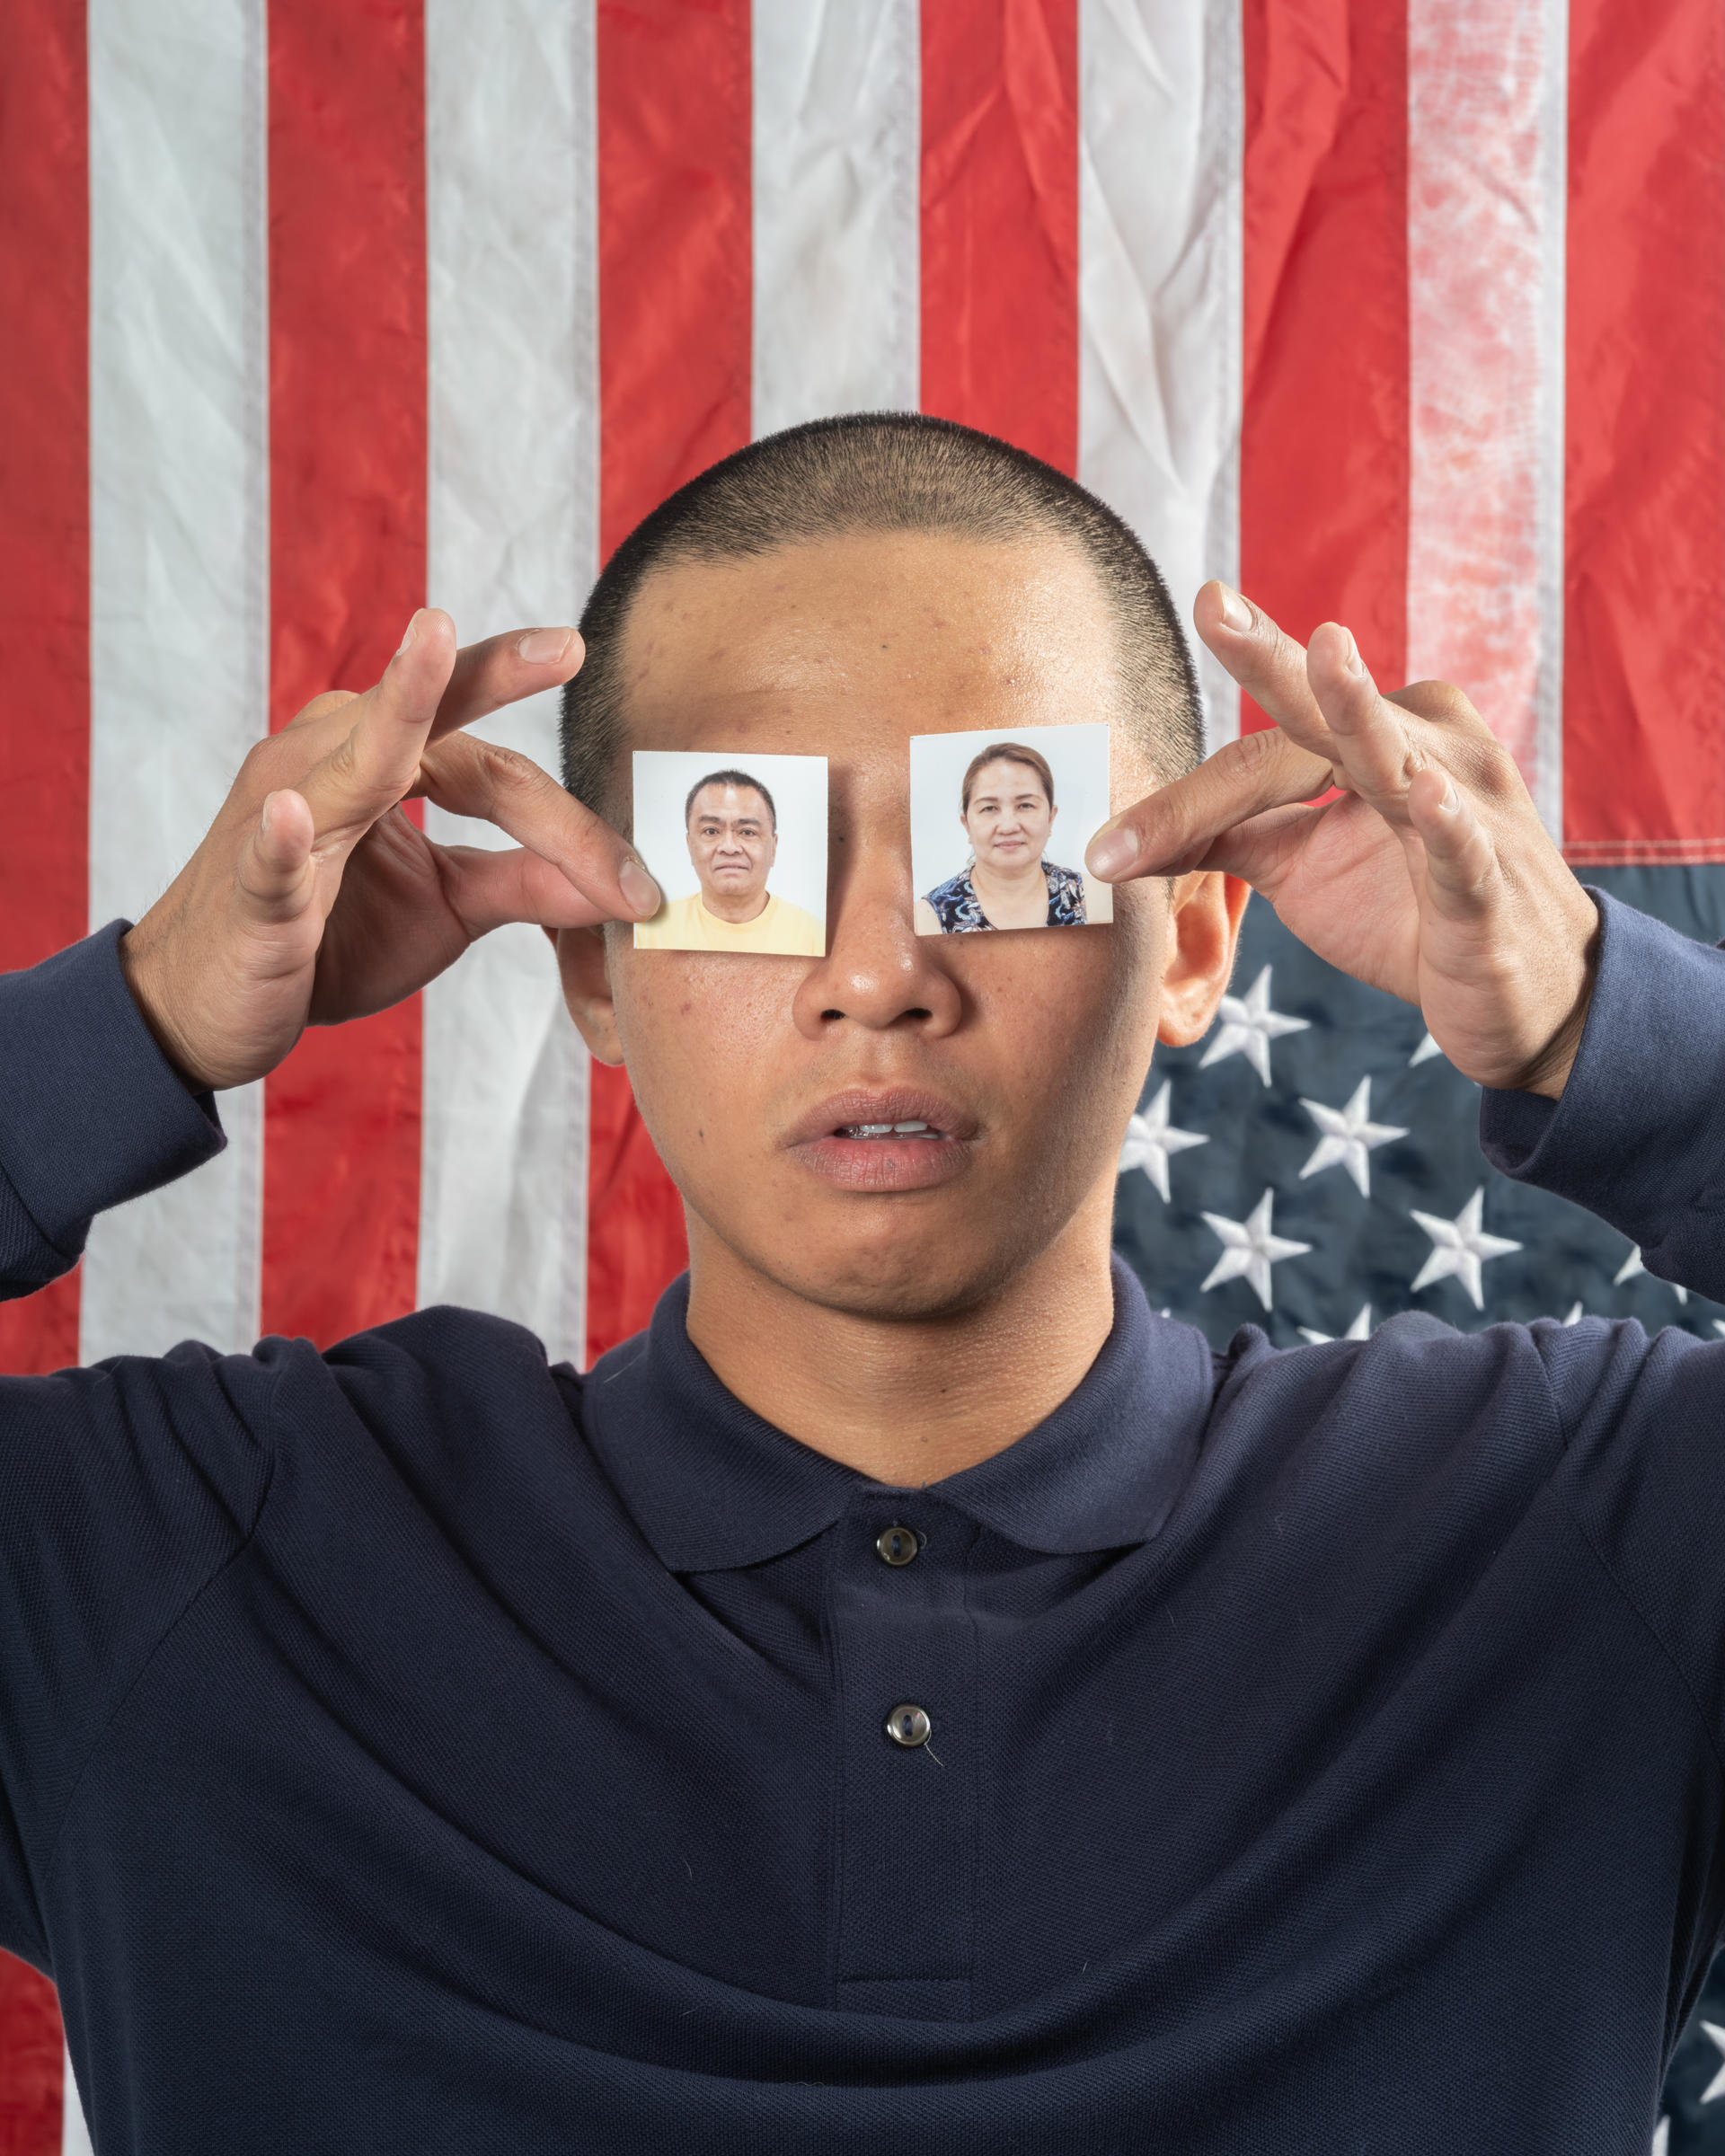 A person holds up two passport photos, one in each hand, covering their eyes with it against an American Flag